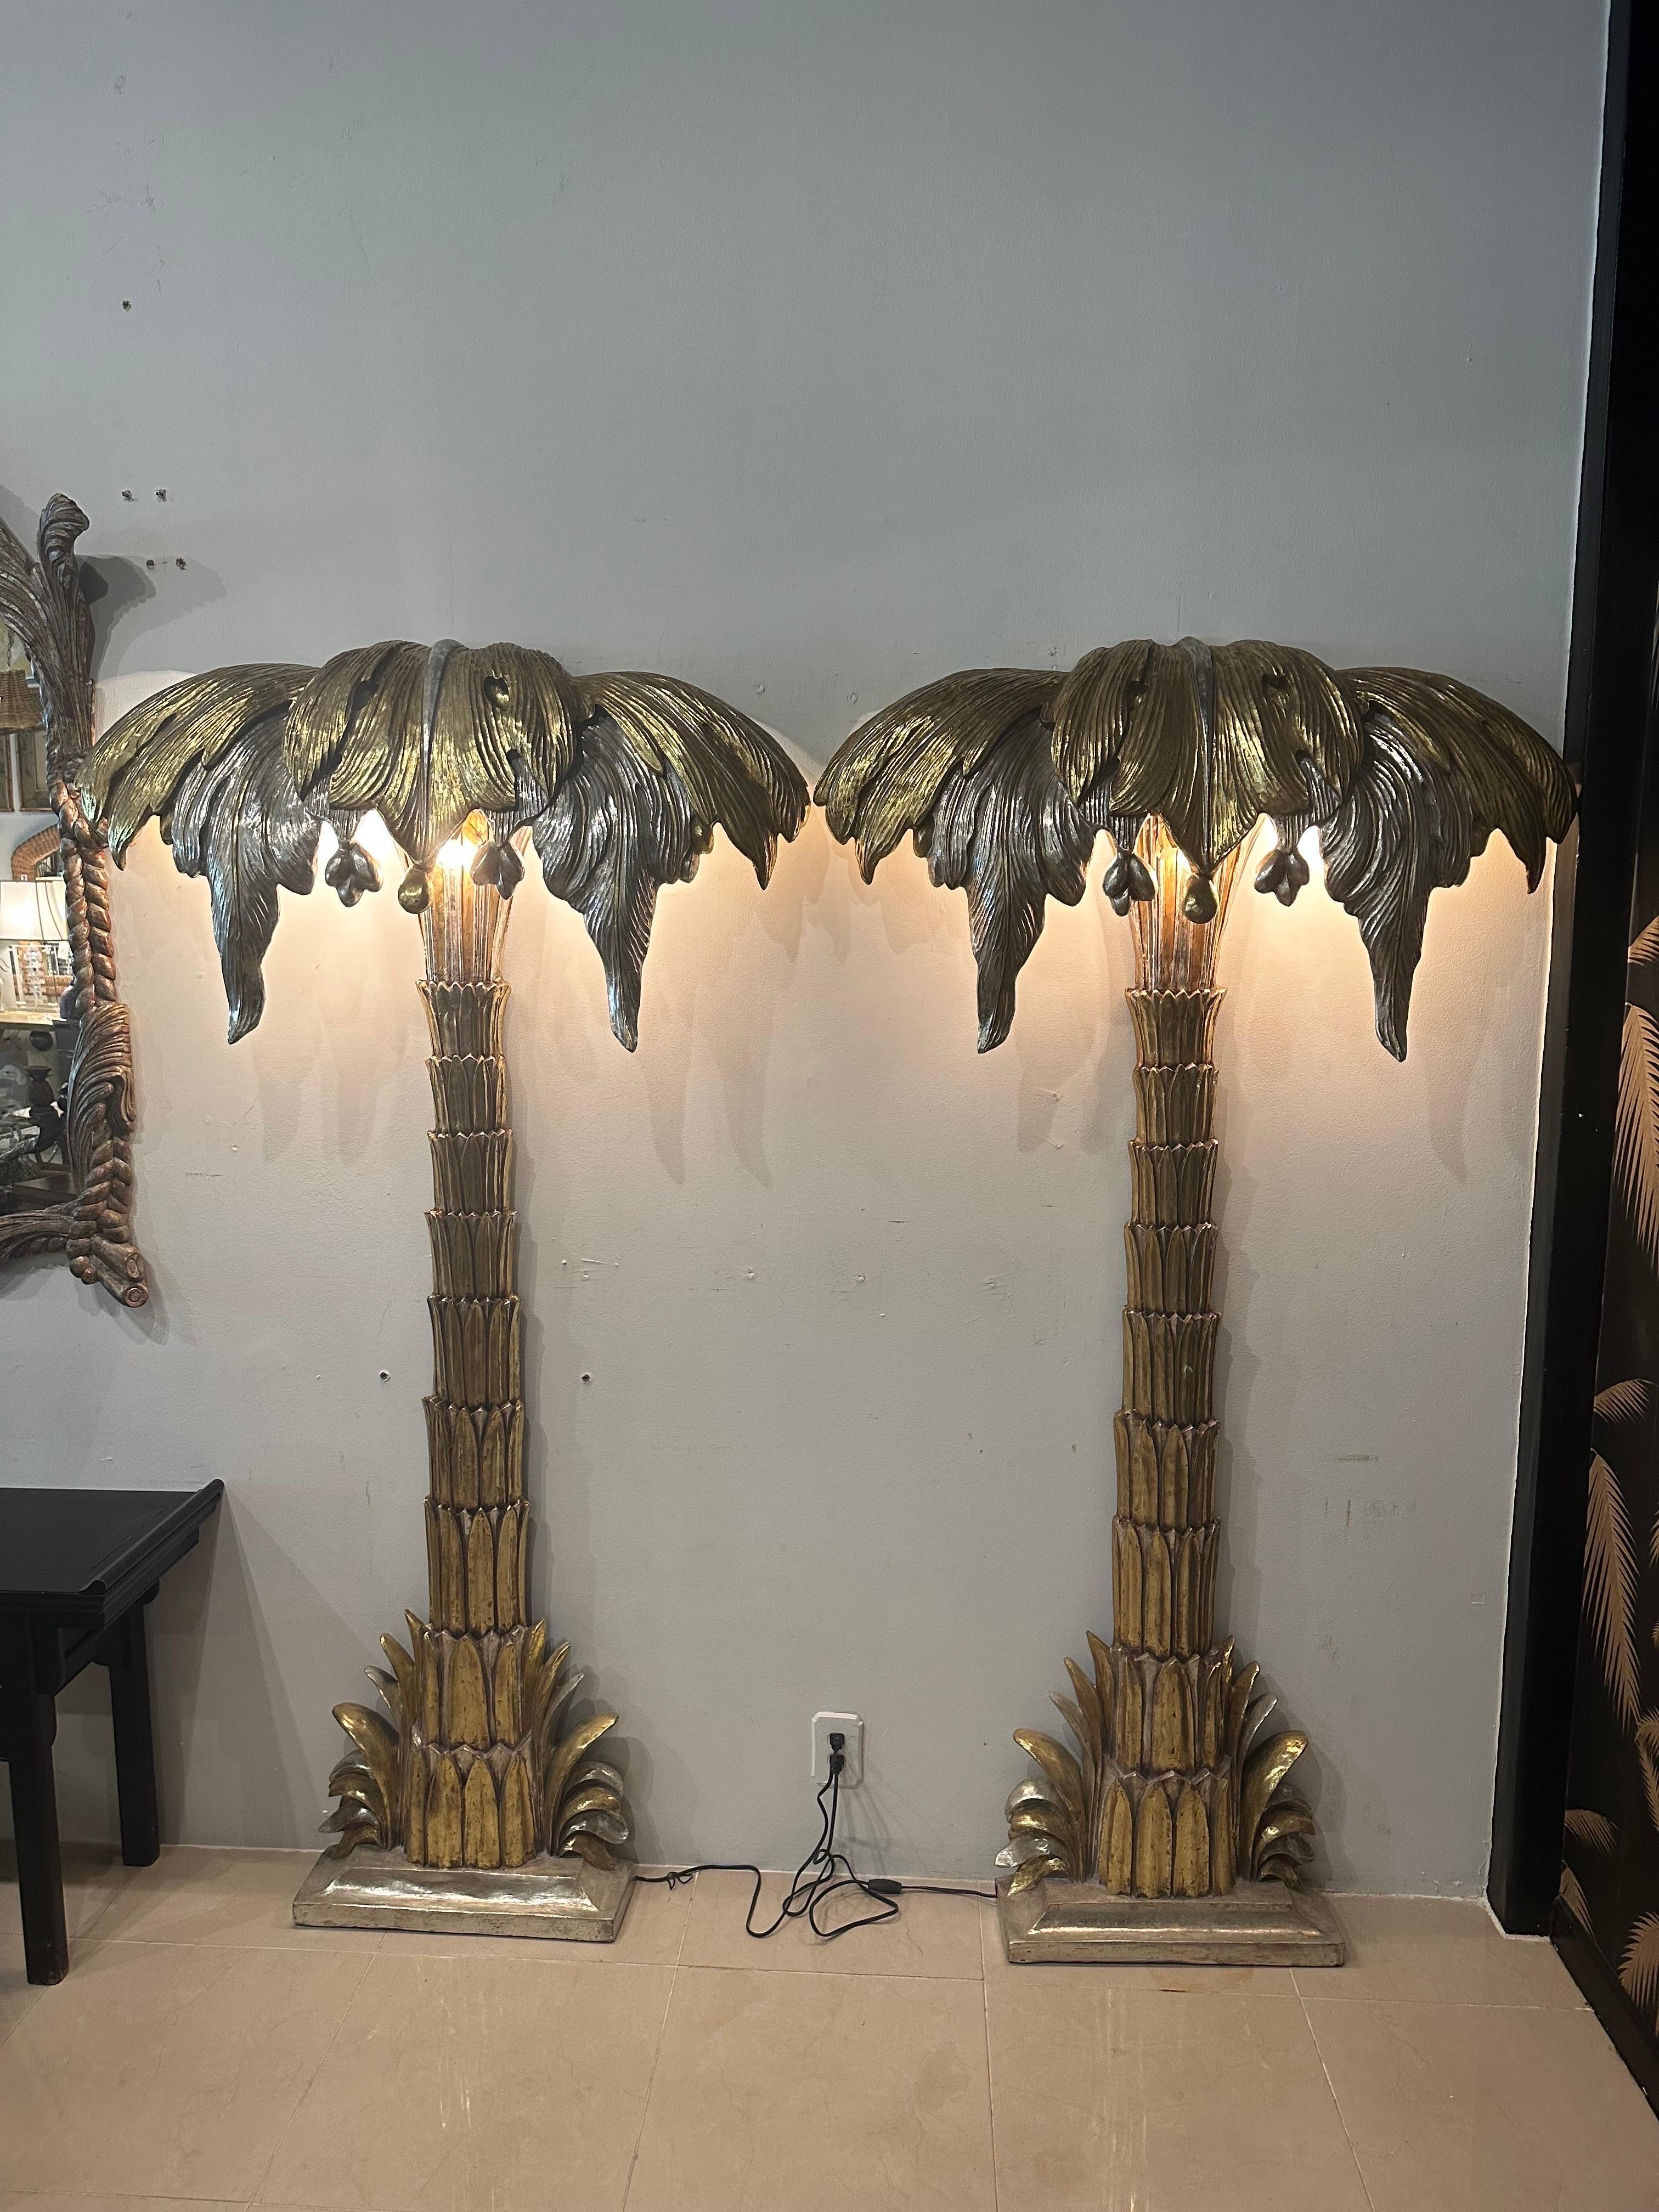 Amazing pair of monumental size palm tree wall floor lamps by Maison Jansen. Silver and gold gilt. Original finish. No chips or breaks. These each have 3 lightbulbs underneath the palm leaves. These have EU converter parts that screw into the light